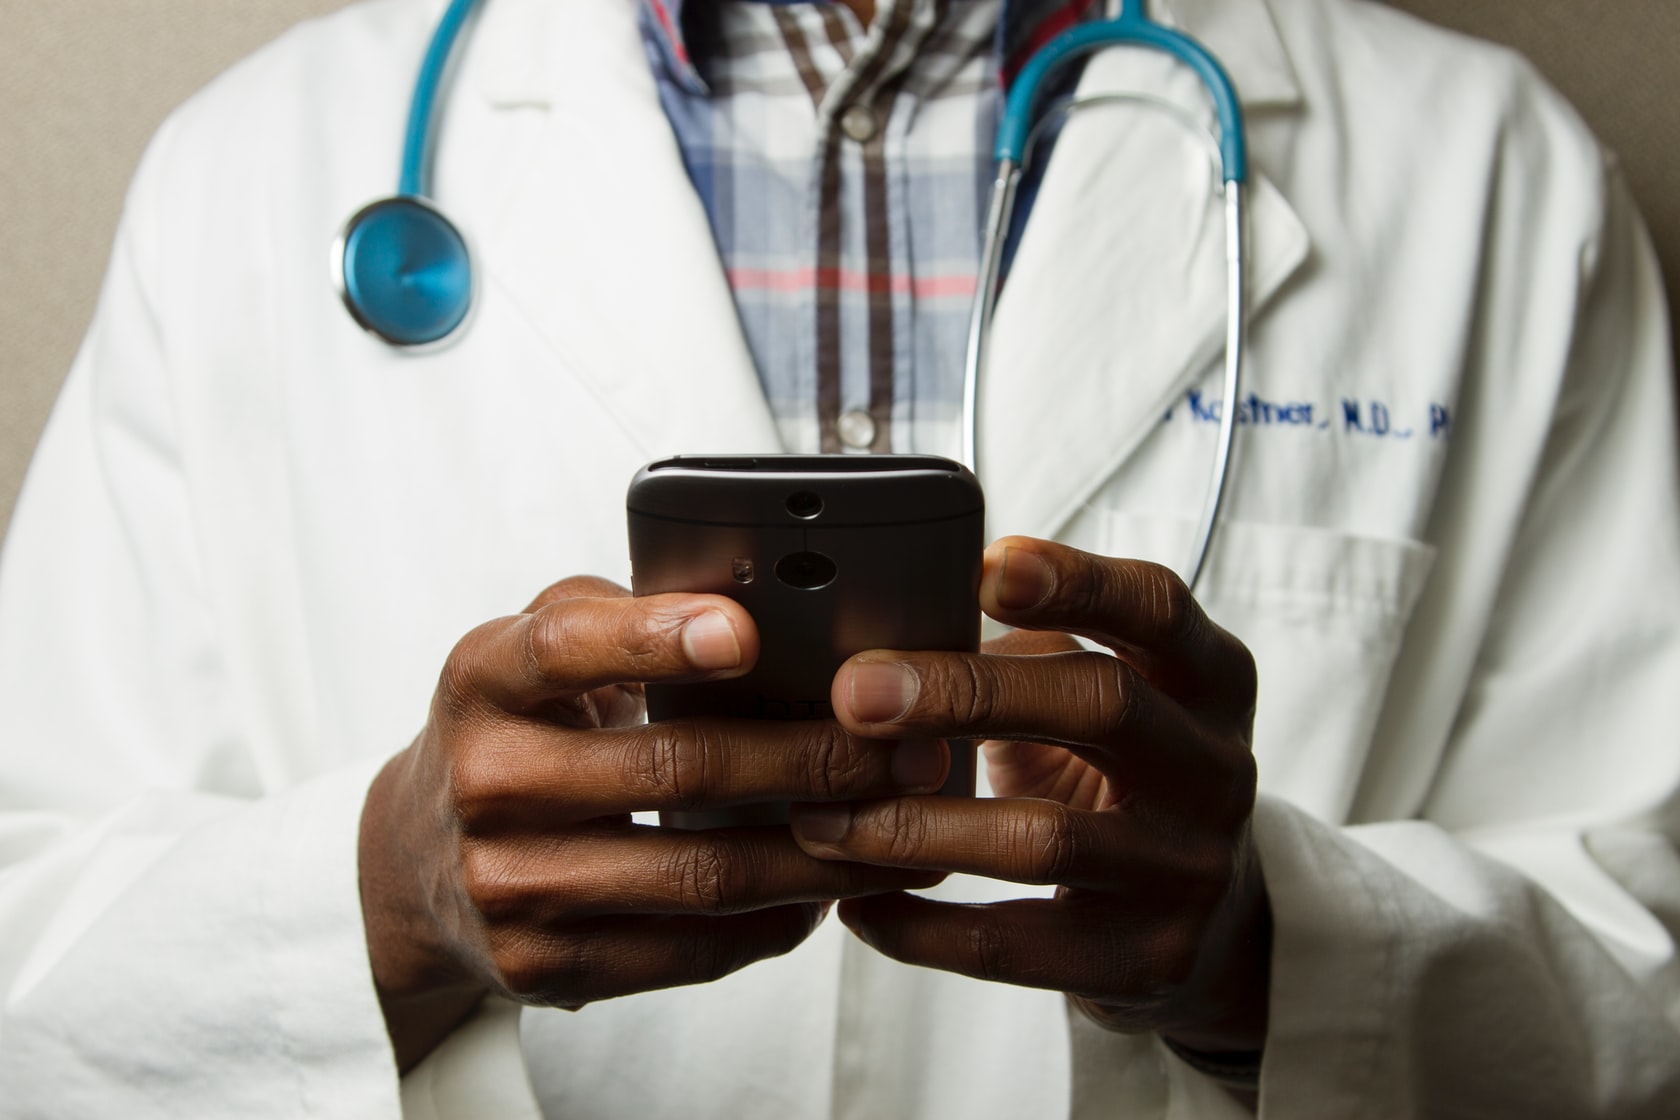 A torso shot of a man wearing a white coat and stethoscope, holding a smartphone.